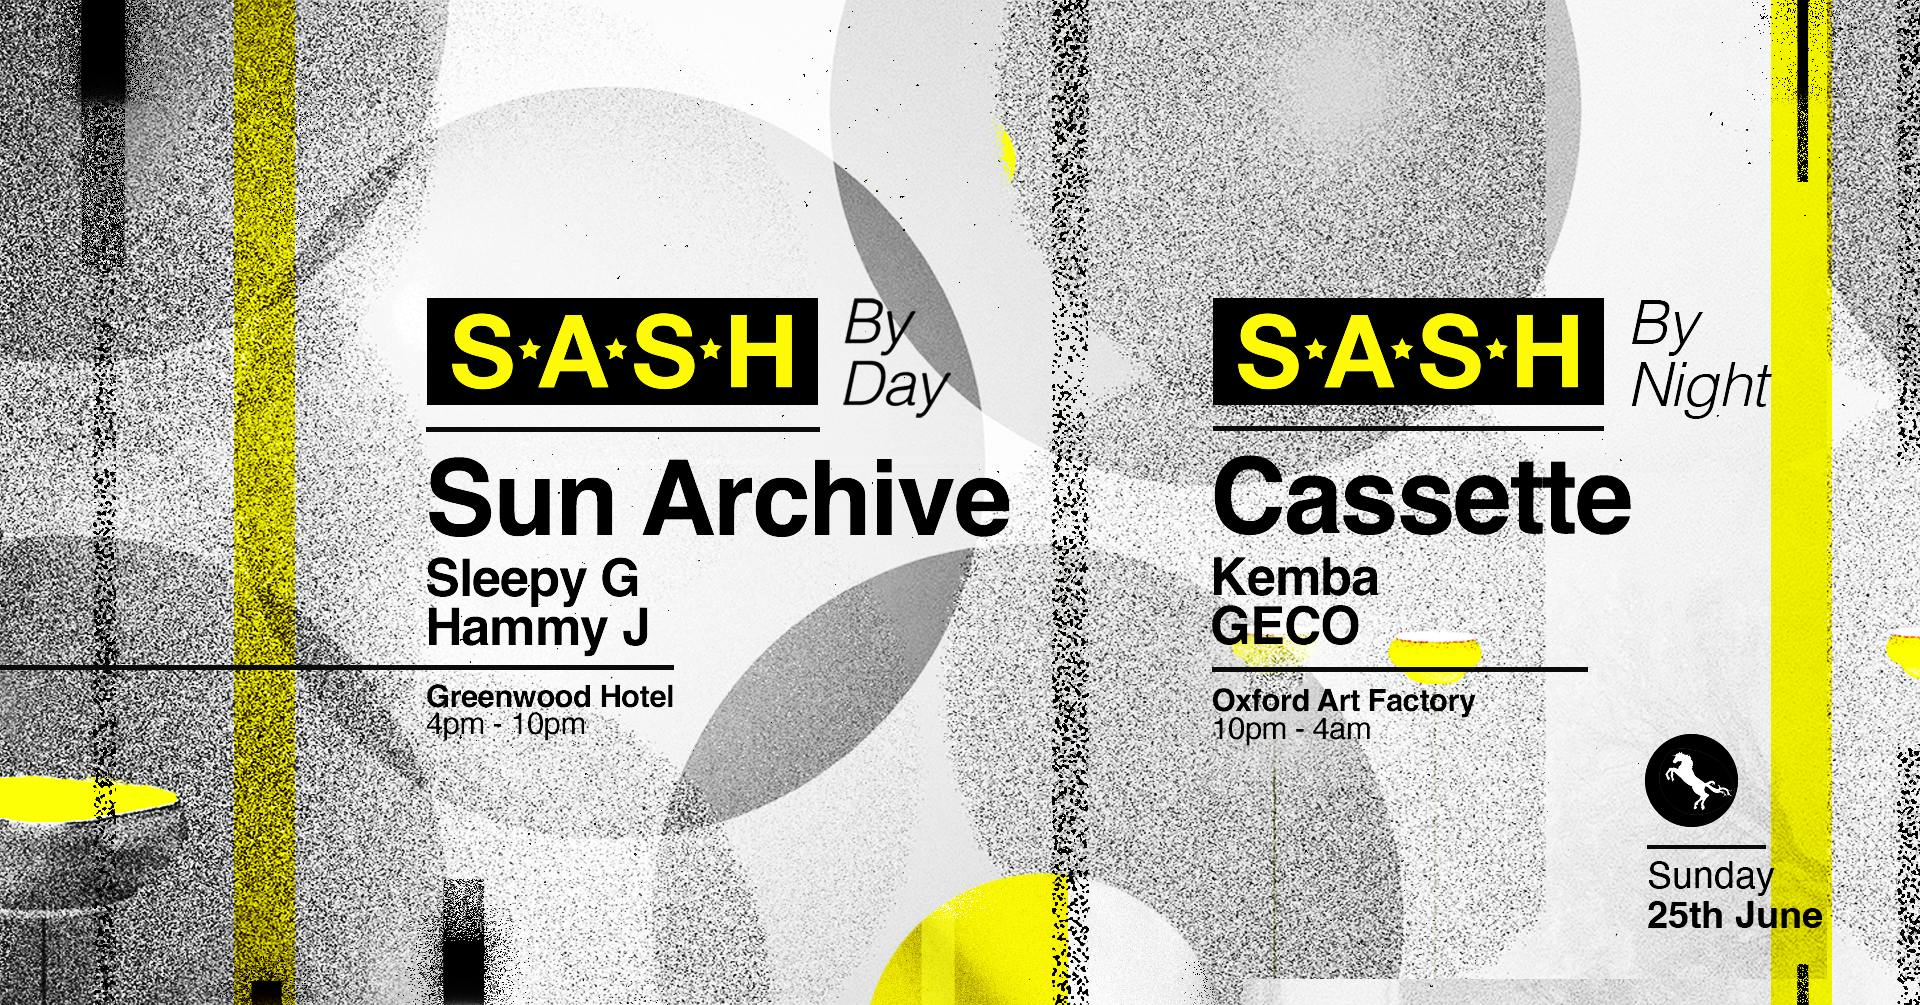 ★ S.A.S.H By Day & Night ★ Sun Archive ★ Cassette ★ Sunday 25th June ★